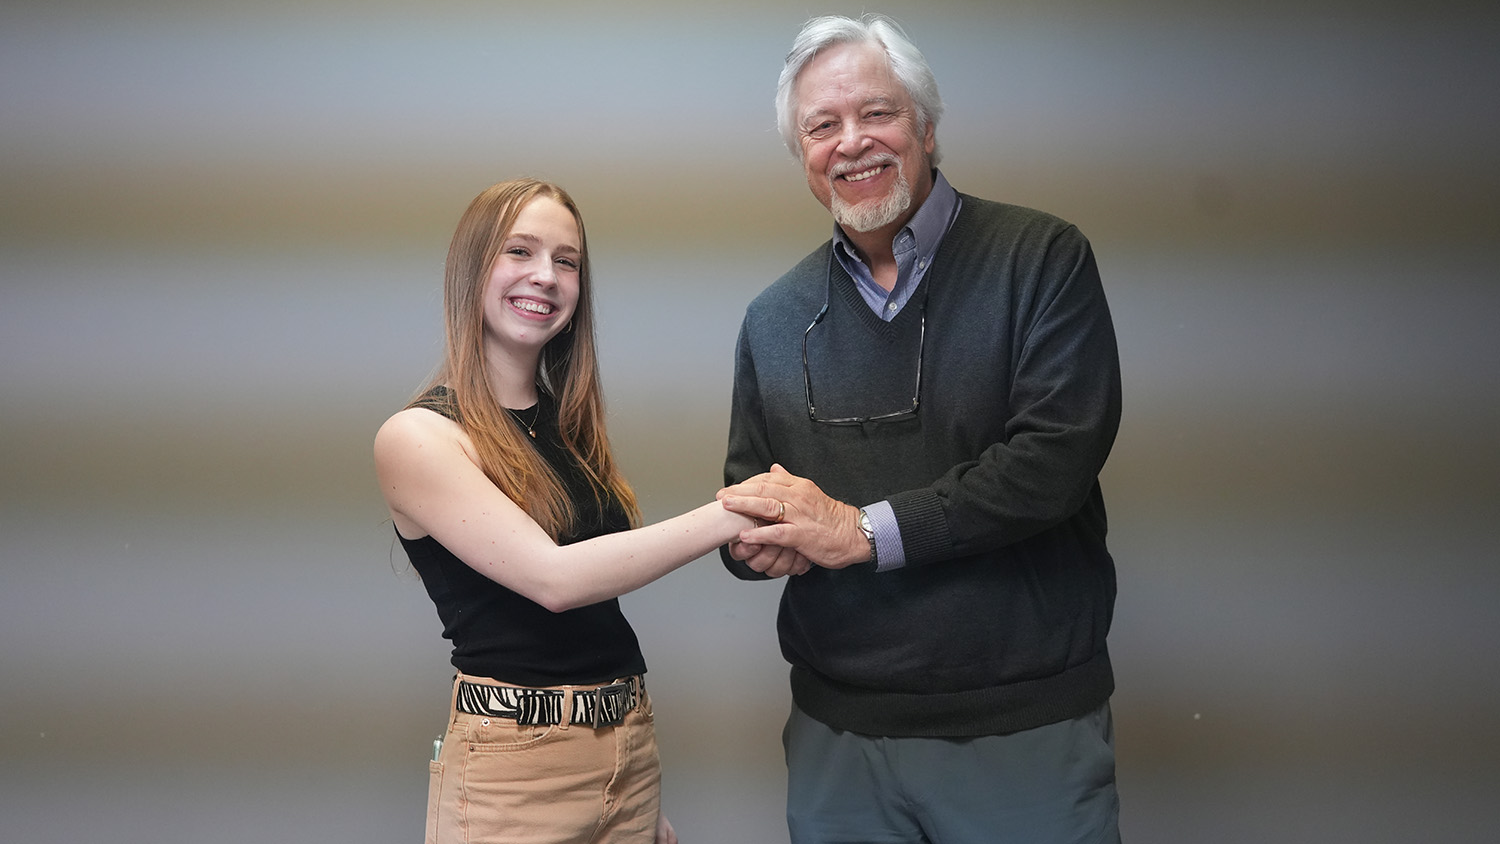 Technician Managing Editor Emily Vespa with Dean Phillips, the namesake of the award. Phillips is a multi-award-winning Senior Lecturer Emeritus from the NC State Department of Communication.